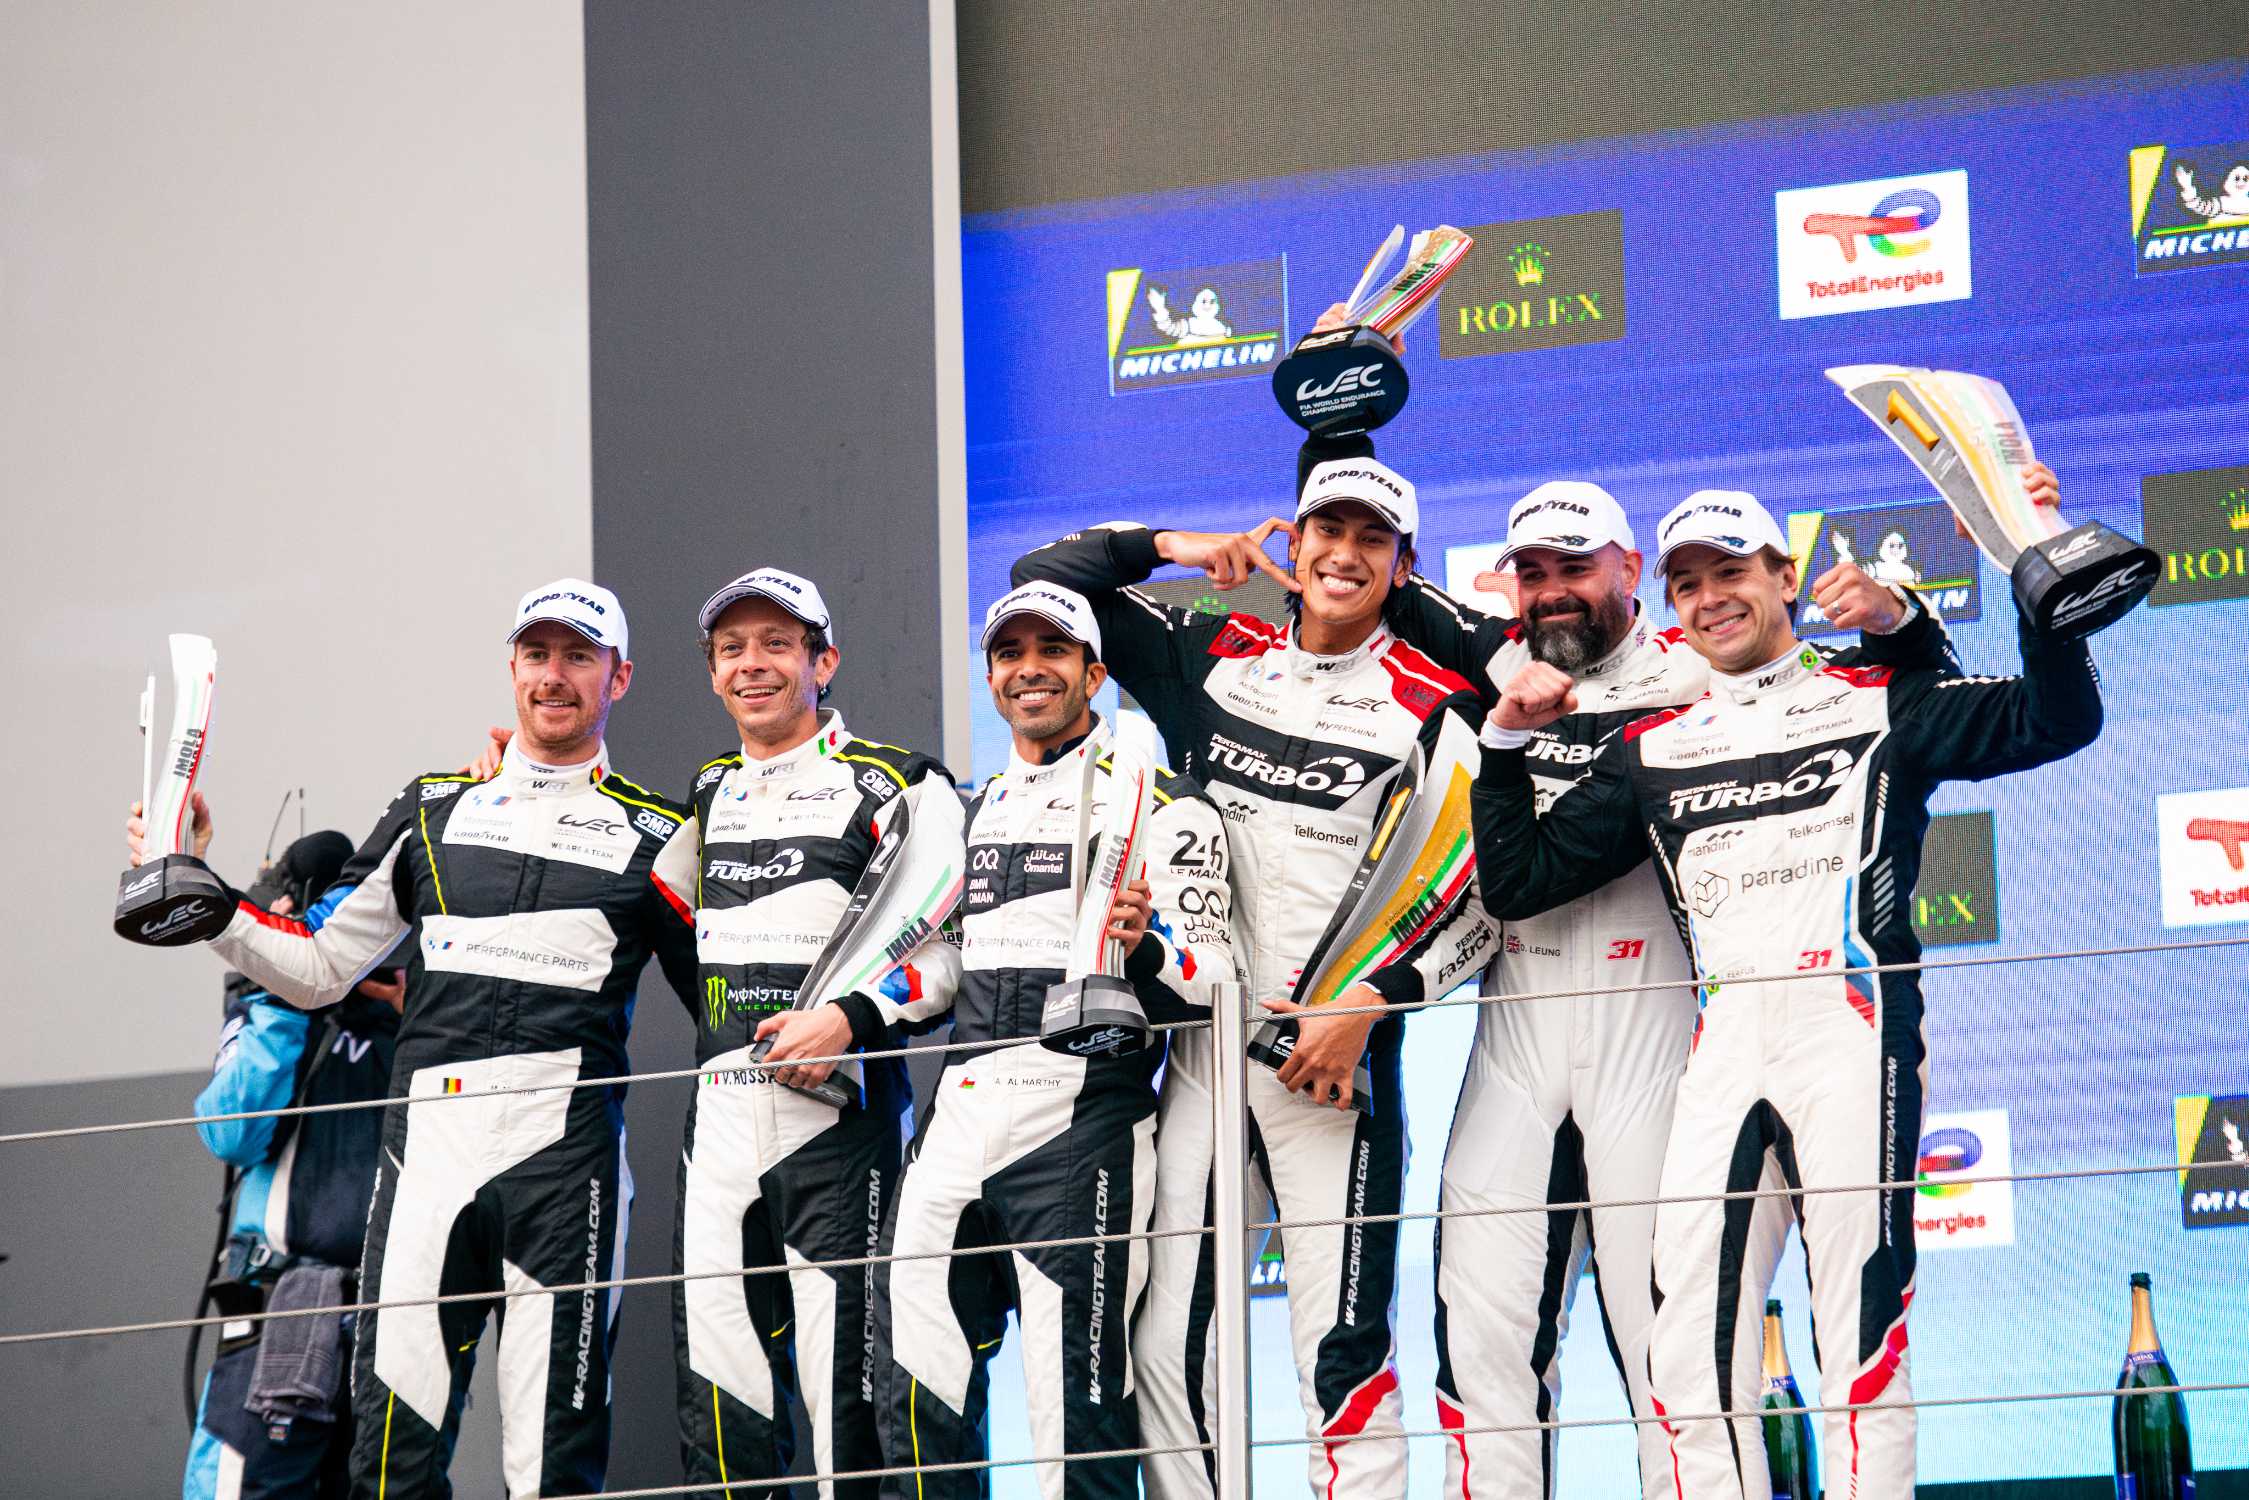 FIA WEC: BMW M4 GT3 triumphs at Imola – Strong race for the #20 BMW M Hybrid V8.